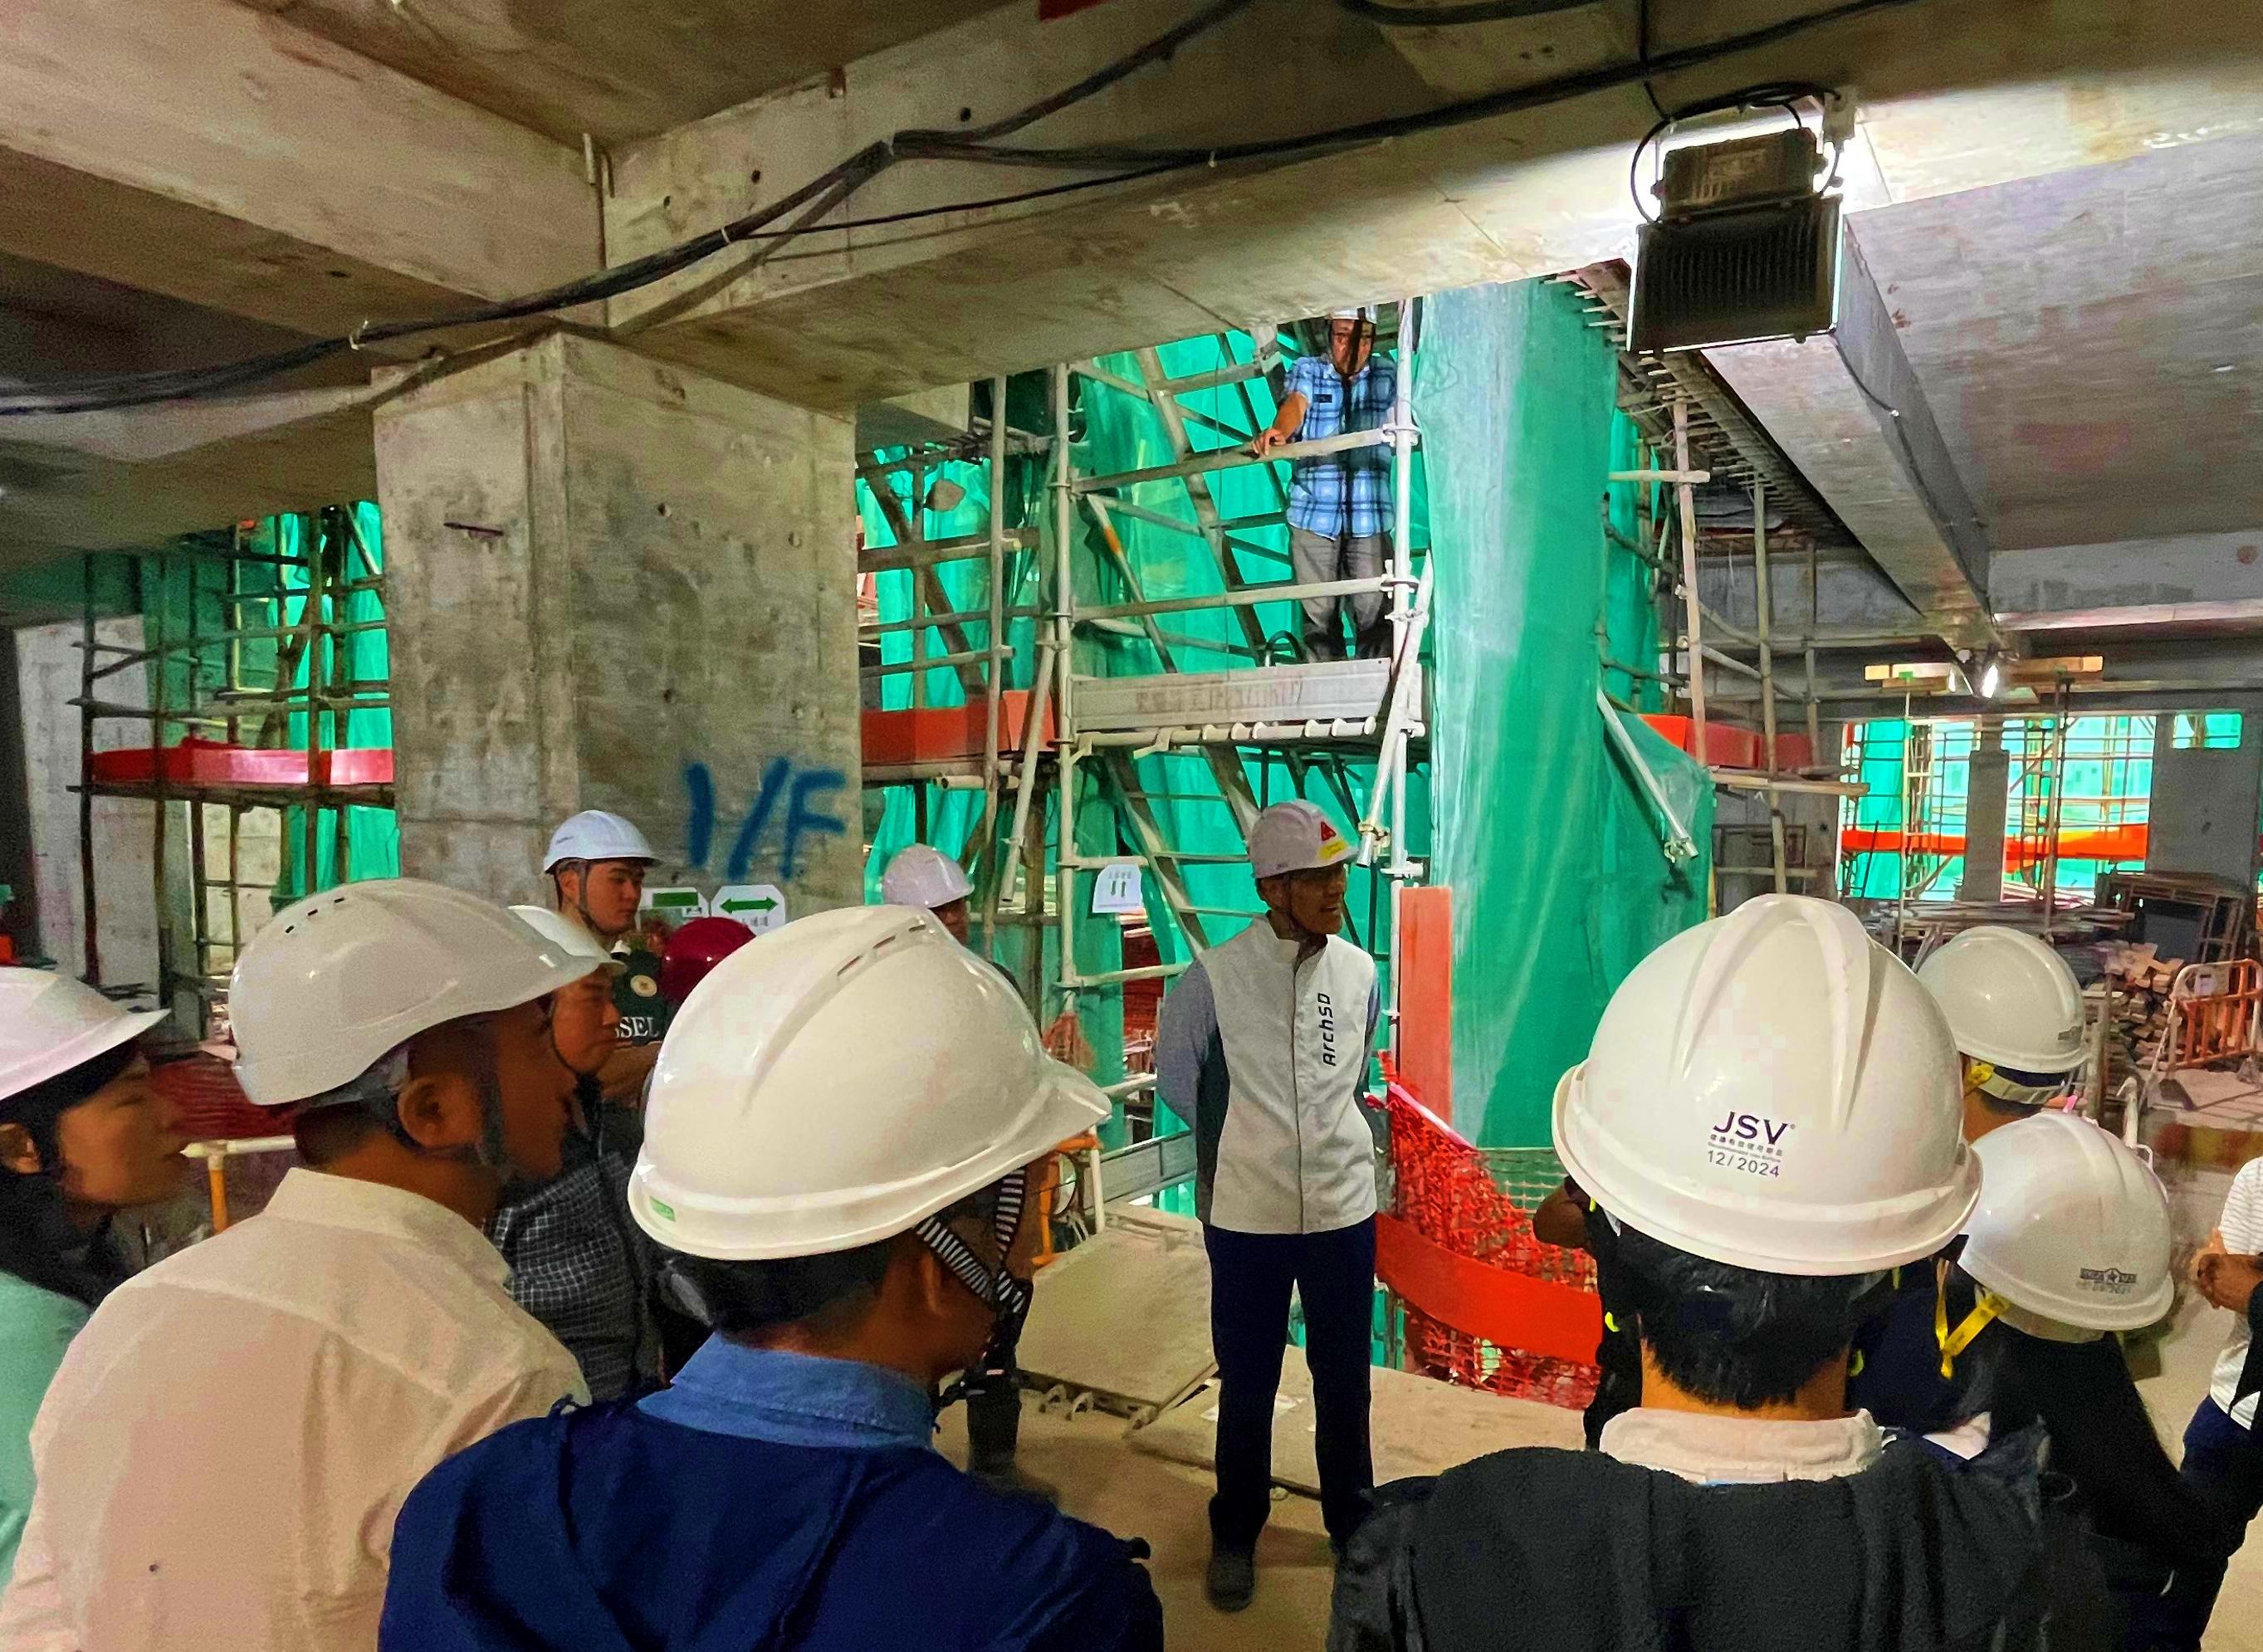 The works departments carried out surprise inspections in the past week, targeting high-risk processes in public works sites, in particular lifting operation and work at height to curb unsafe practices. The Director of Architectural Services, Mr Edward Tse (centre), was inspecting a site of the public works under his charge.